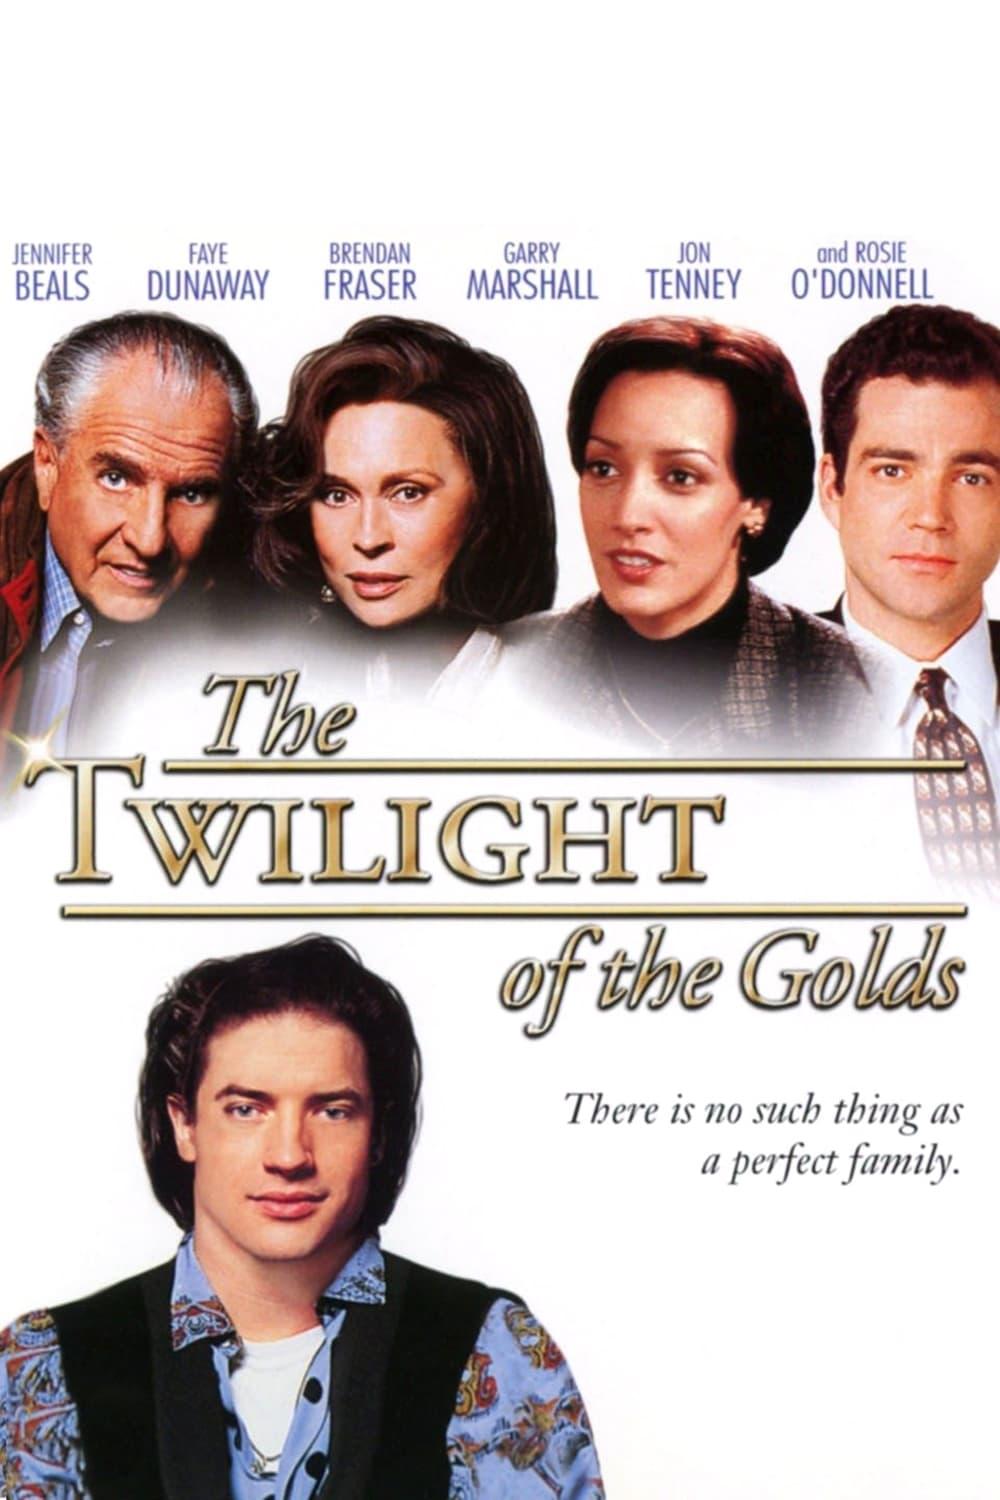 The Twilight of the Golds poster